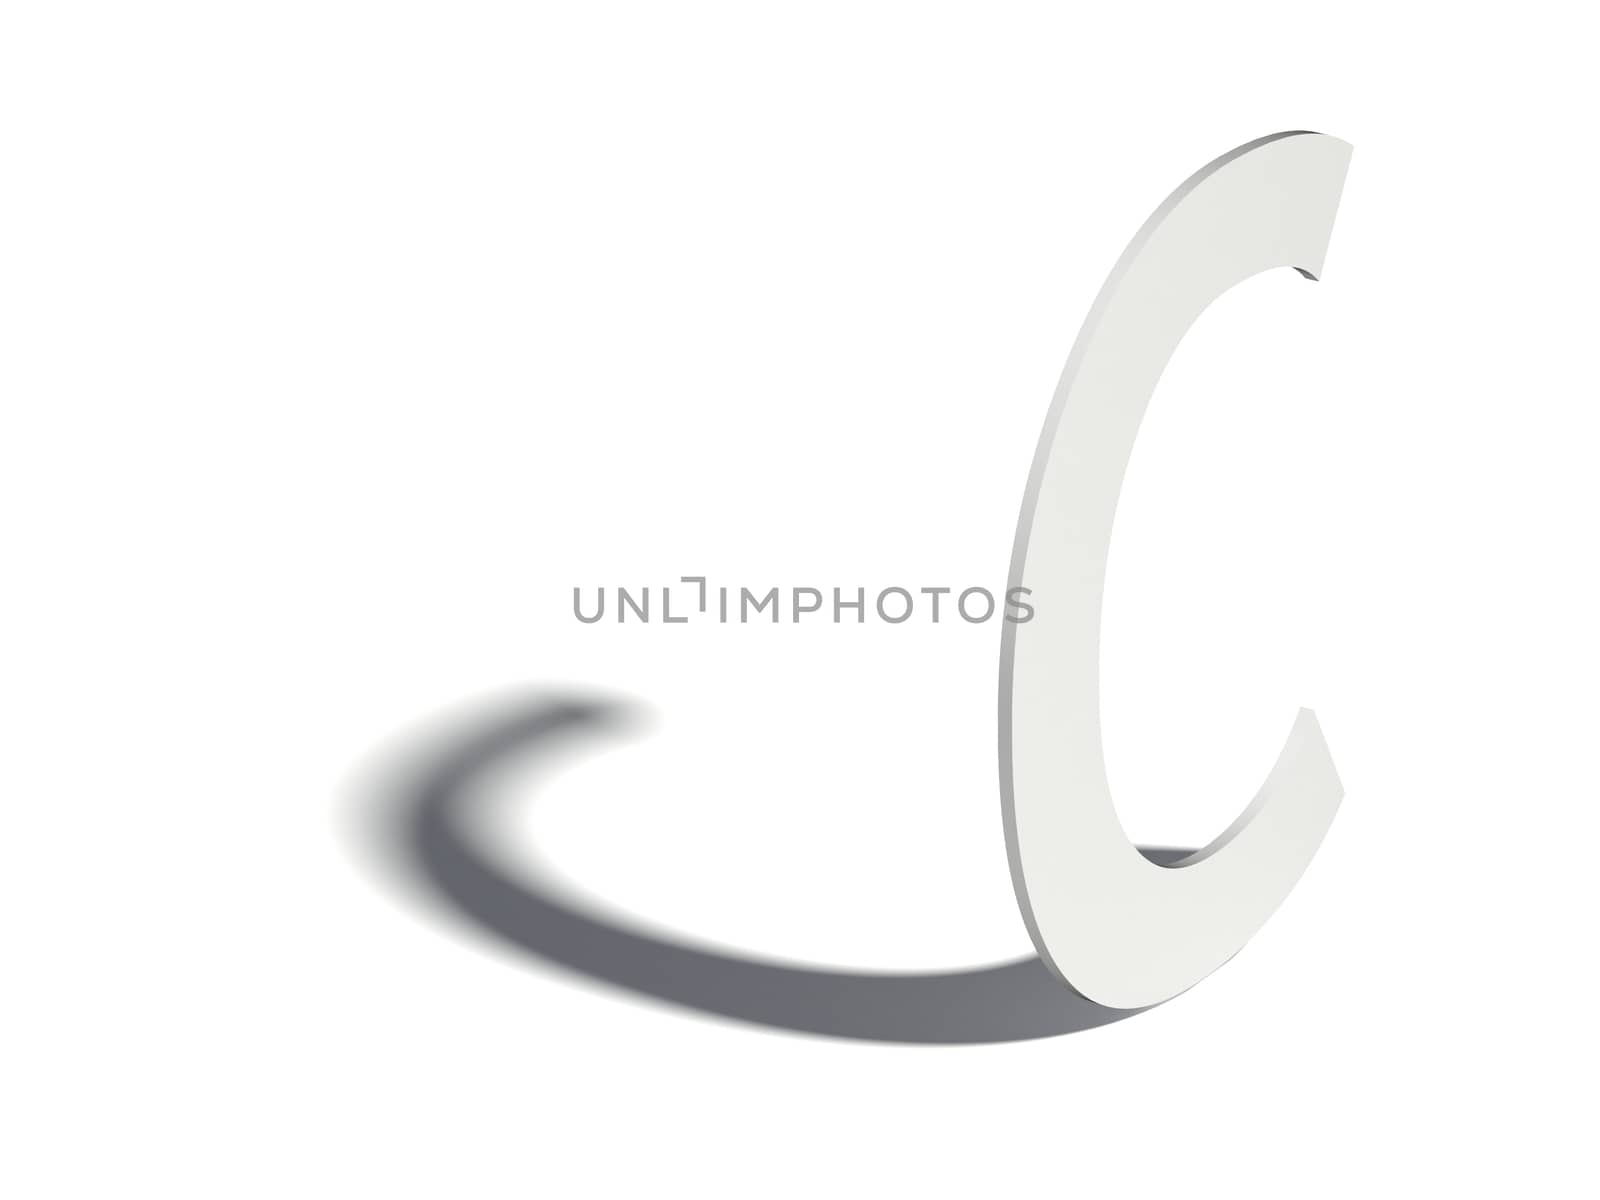 Drop shadow font. Letter C. 3D render illustration isolated on white background